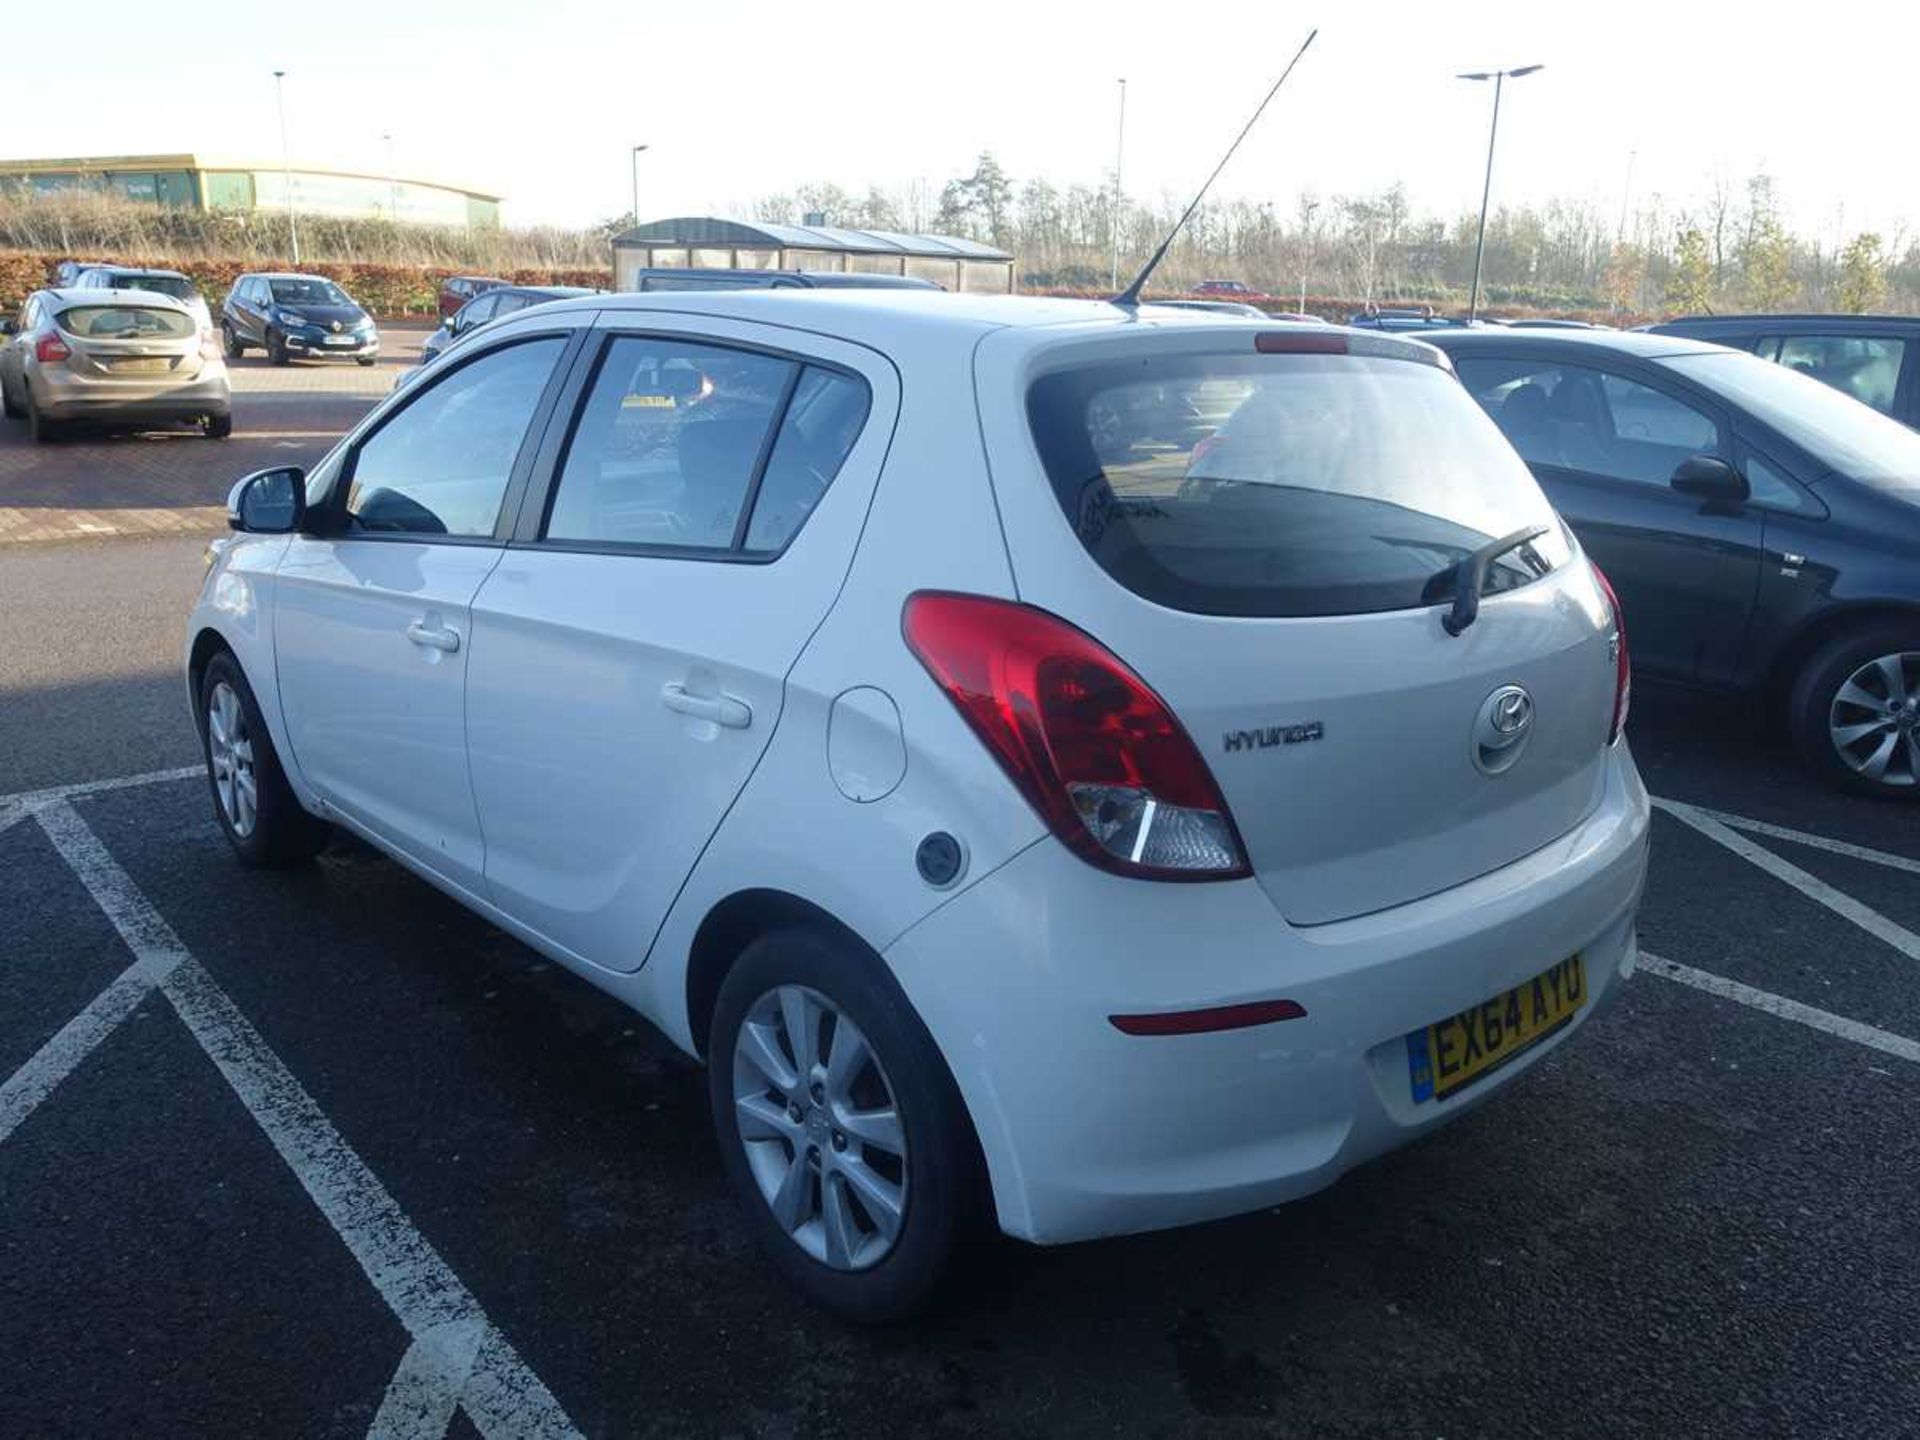 (EX64 AYU) Hyundai i20 Active in white, 5 speed manual, first registered 01/10/2014, 1248cc gas bi- - Image 7 of 9